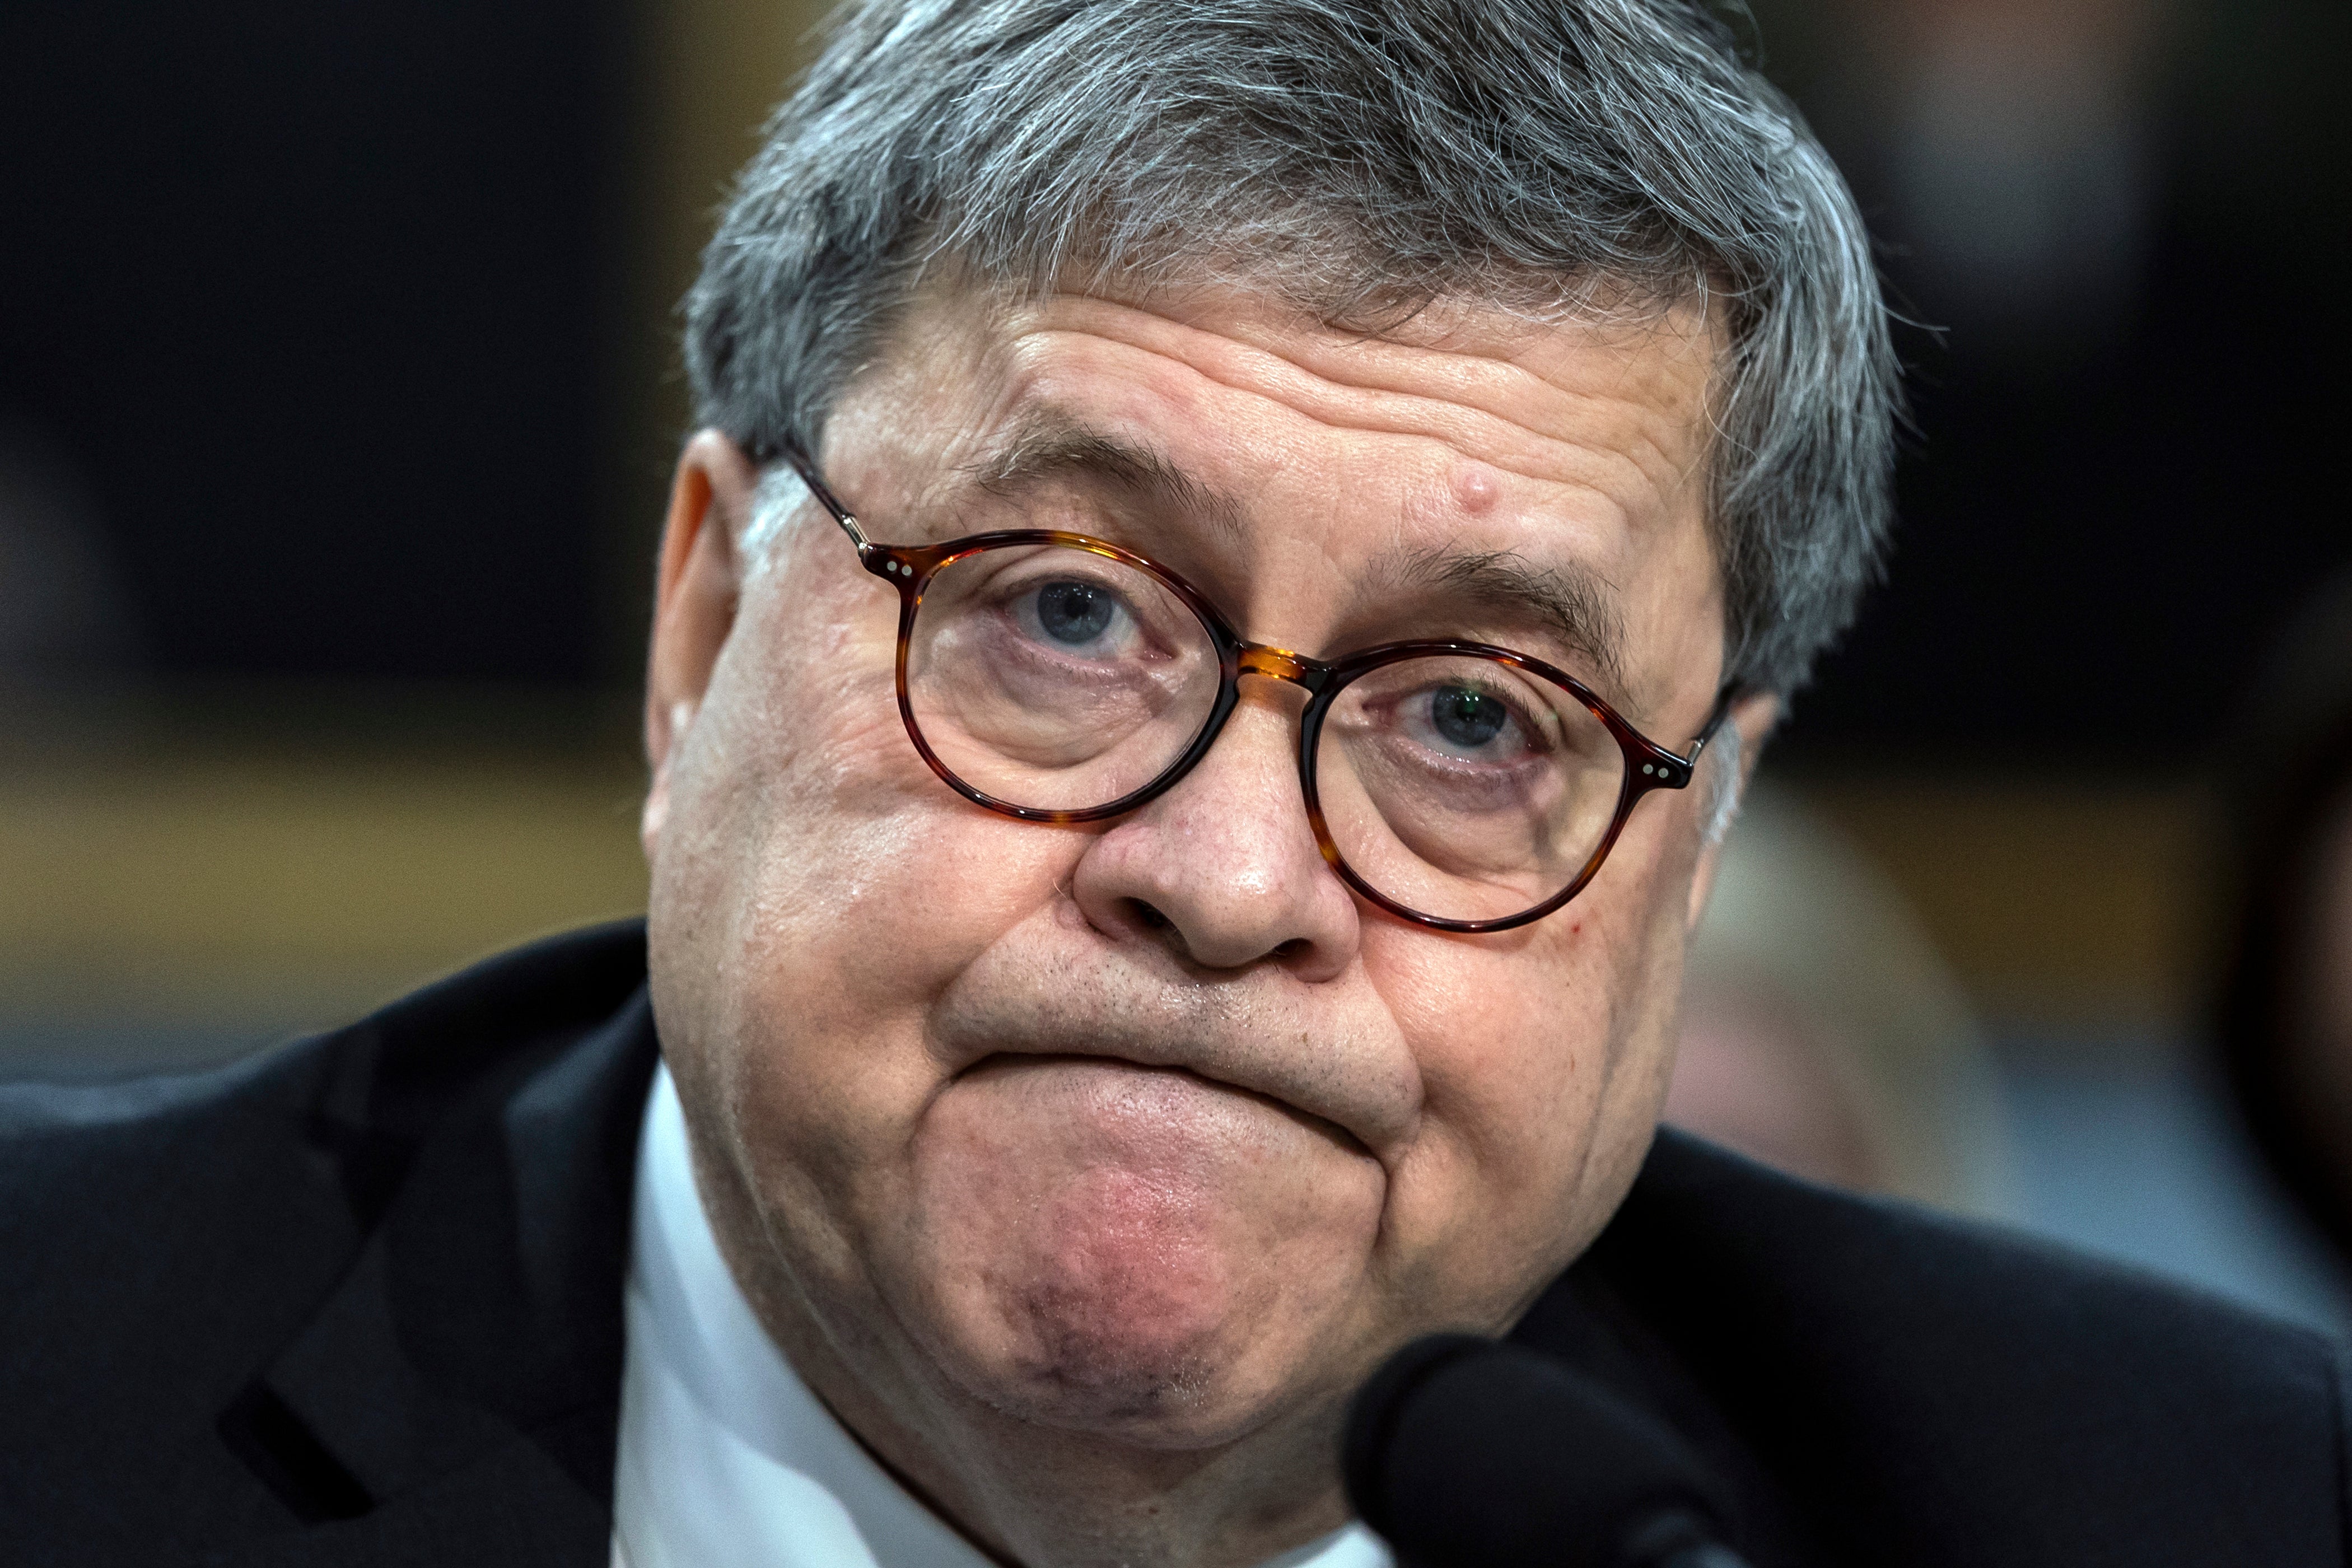 Former attorney general Bill Barr spoke out about Trump’s investigations